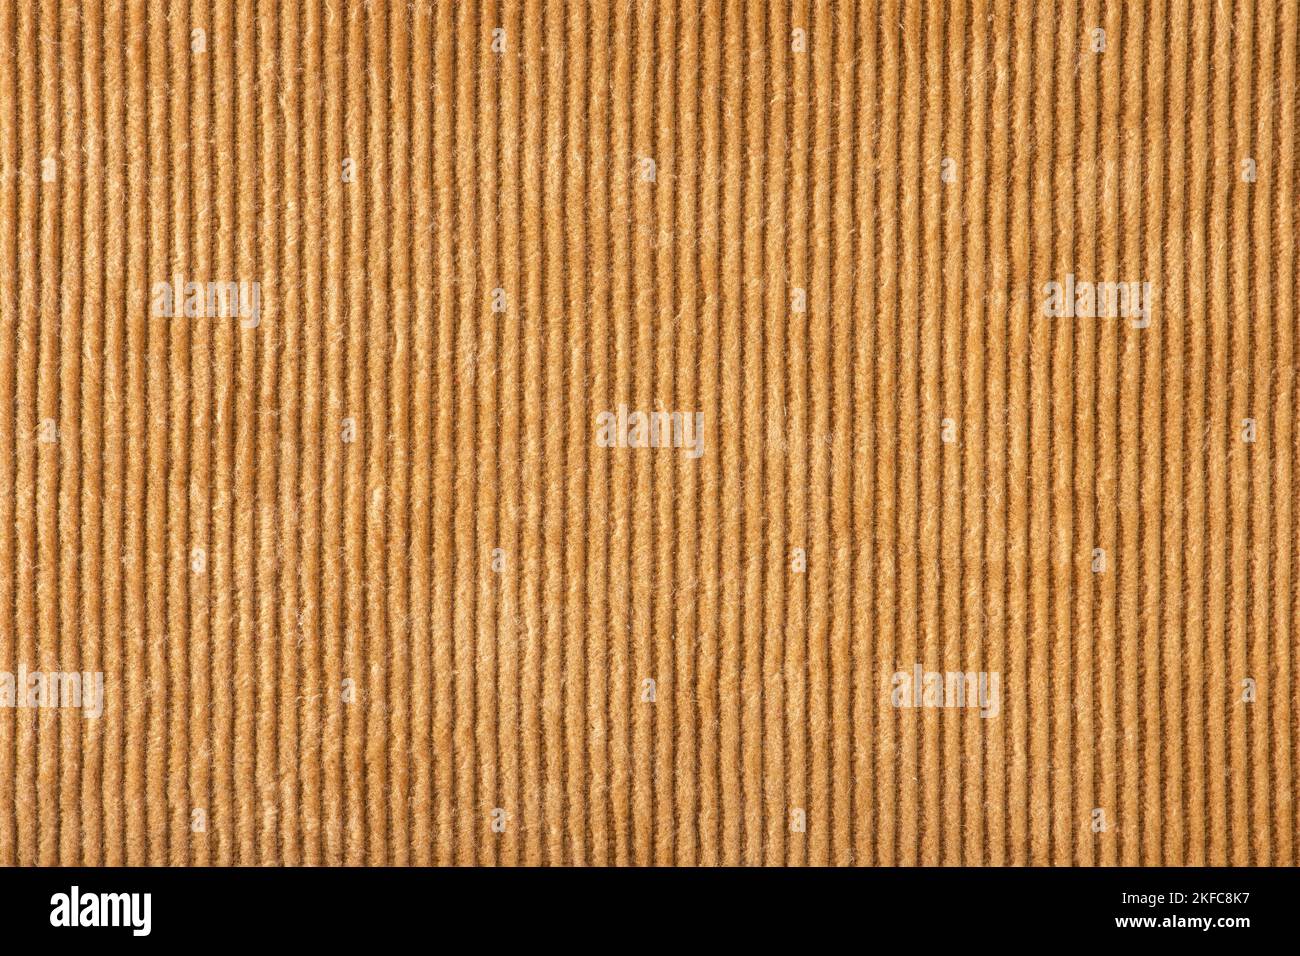 Texture of ribbed velvet. Texture of velvet fabric in light brown color with vertical stripes. Stock Photo